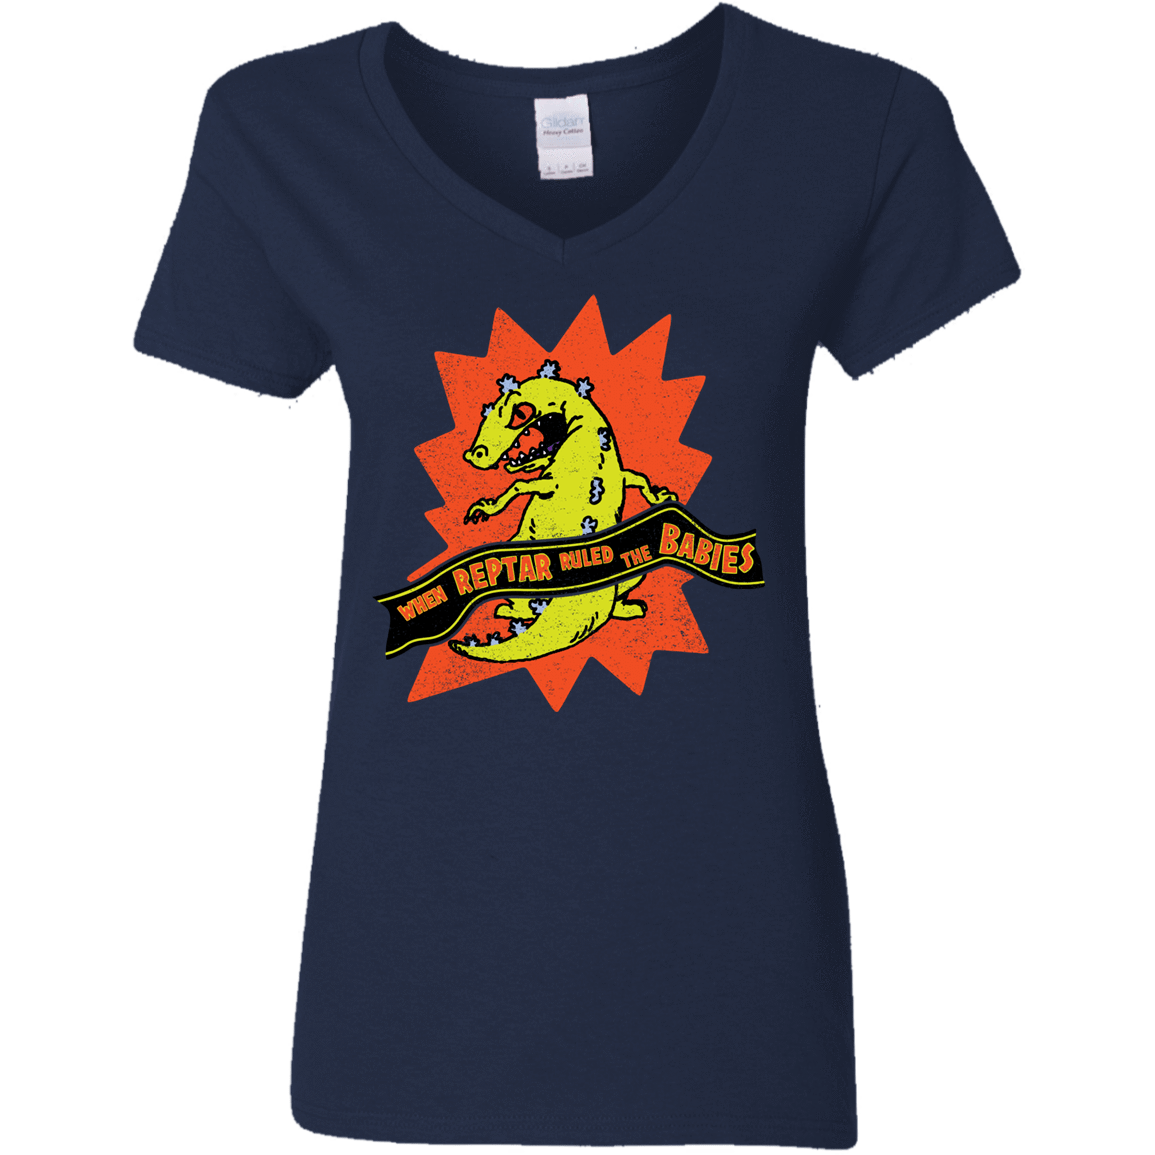 T-Shirts Navy / S When Reptar Ruled The Babies Women's V-Neck T-Shirt